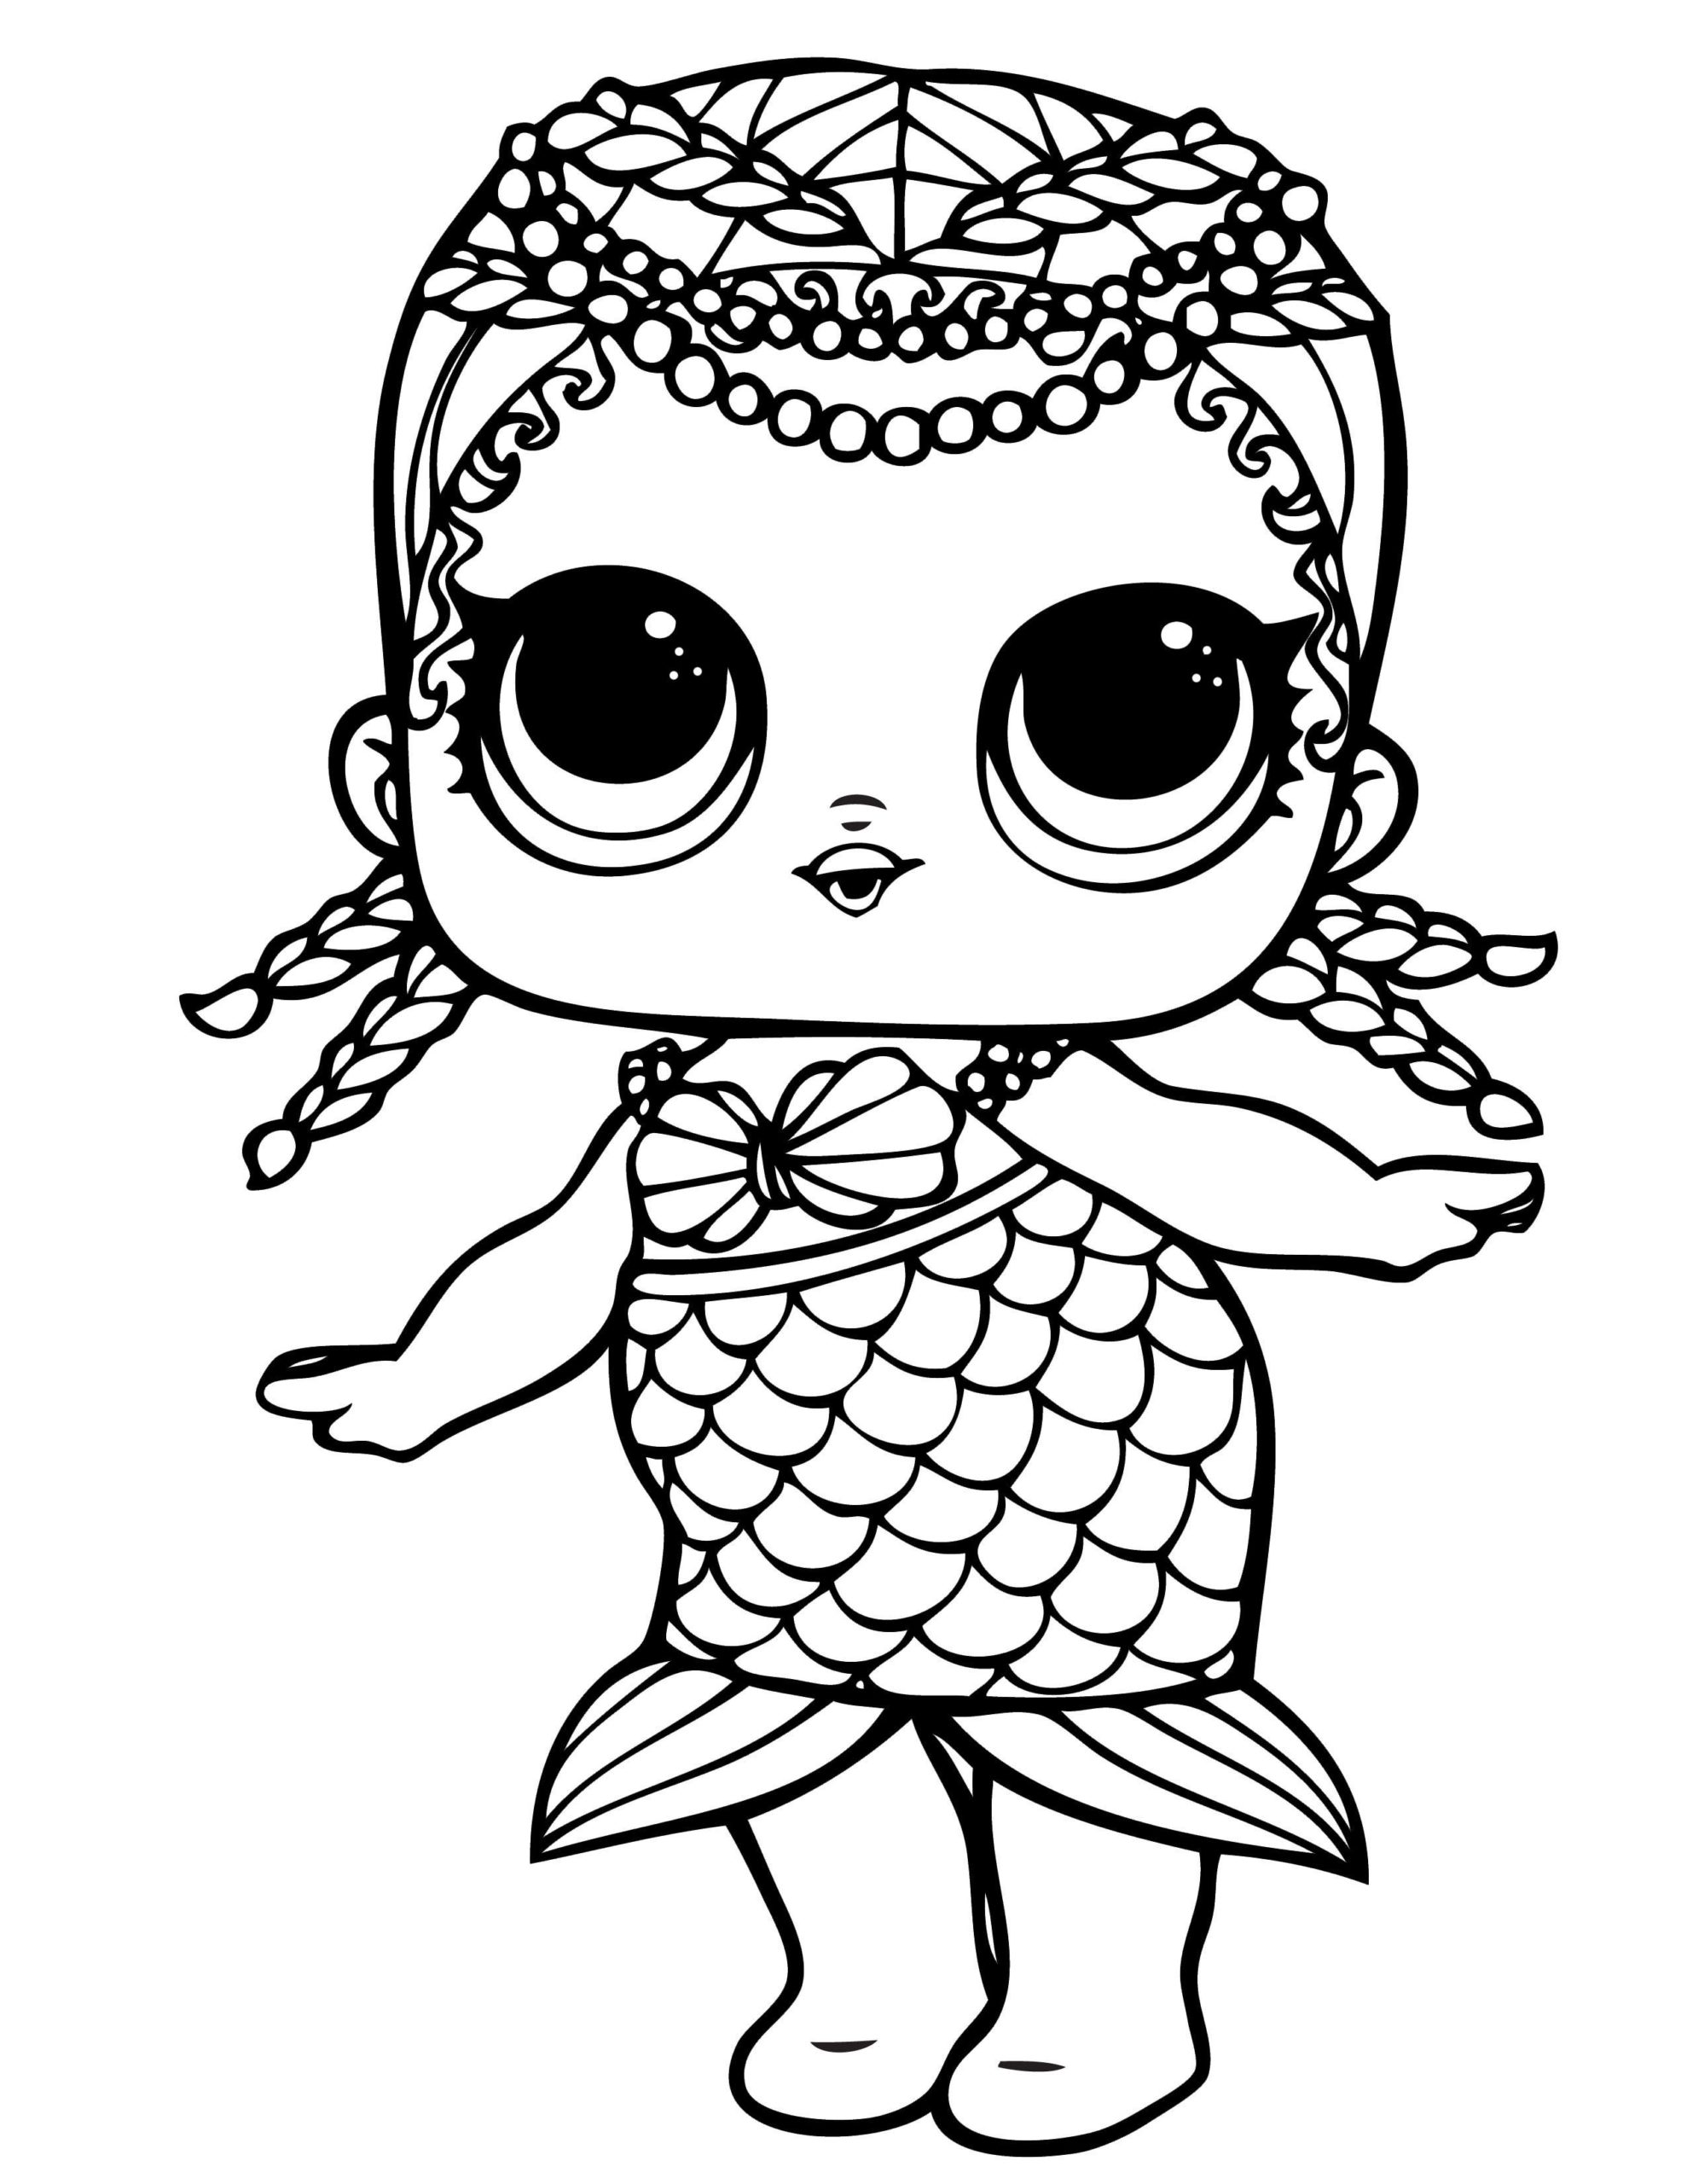 Coloring Pages : Surprise Coloring Book Lol Colouring Pictures ...